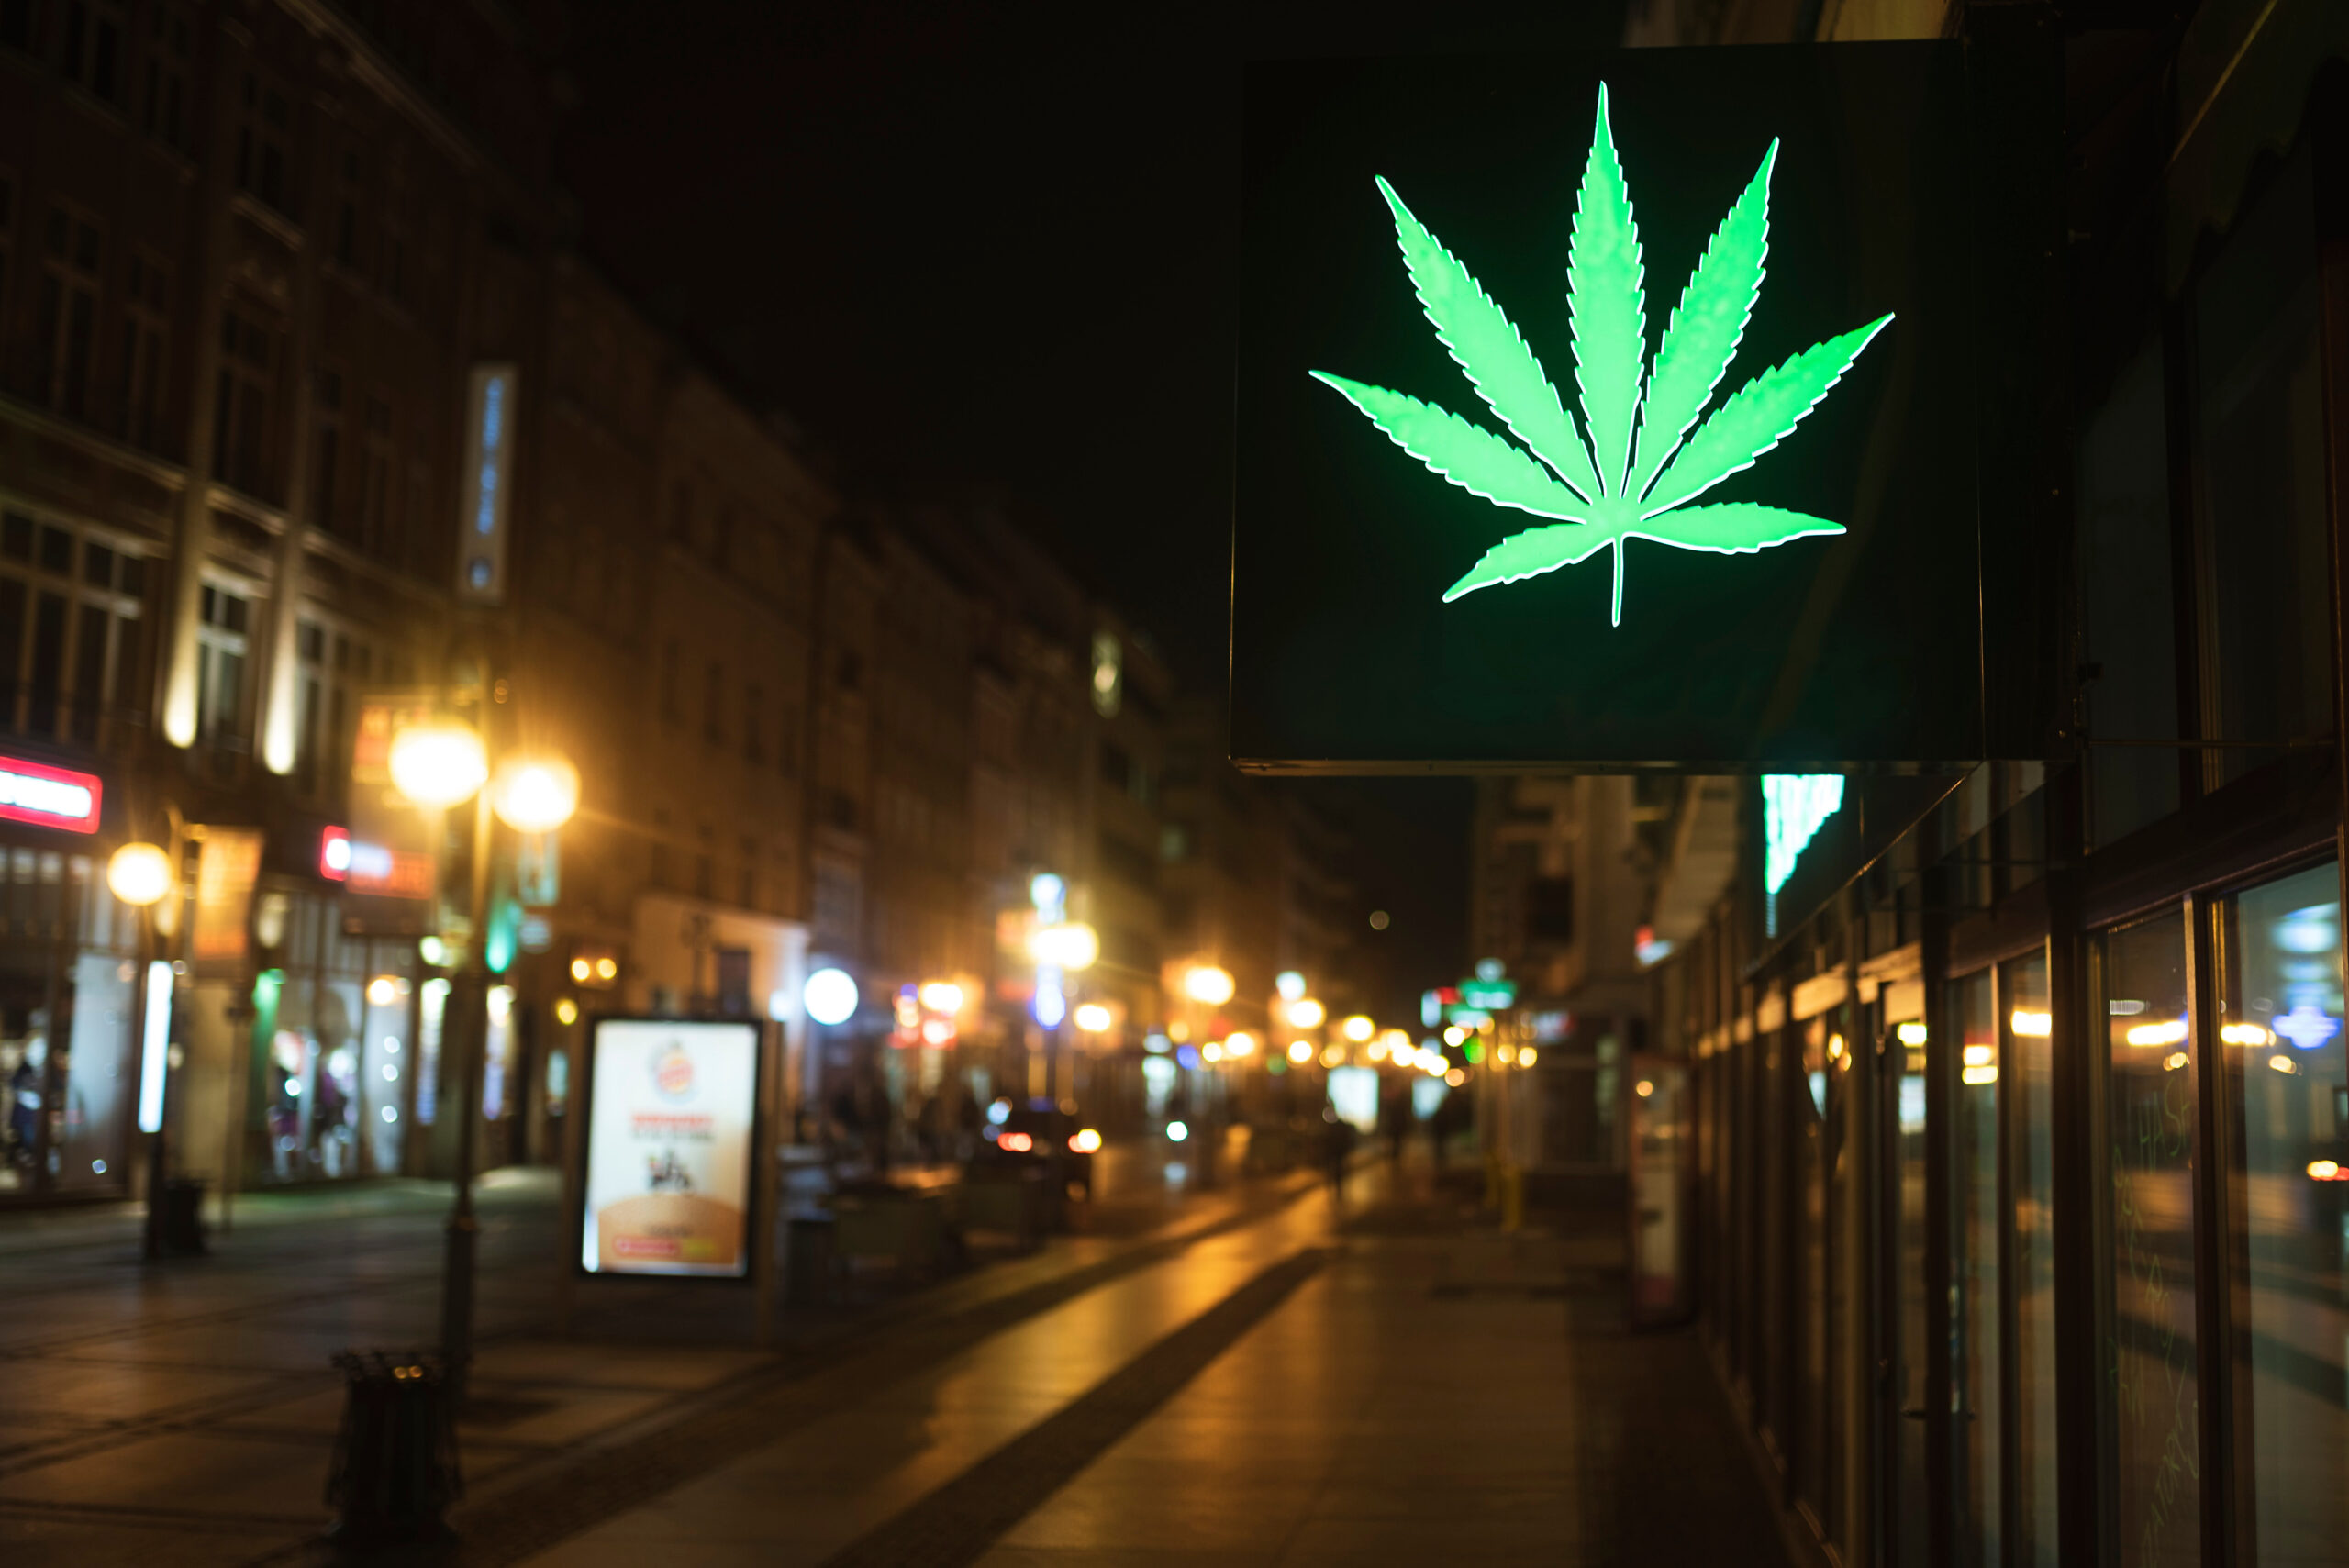 Time’s up for I-71 weed gift shops as first warning letters hit Georgia Ave. and Georgetown unlicensed dispensaries